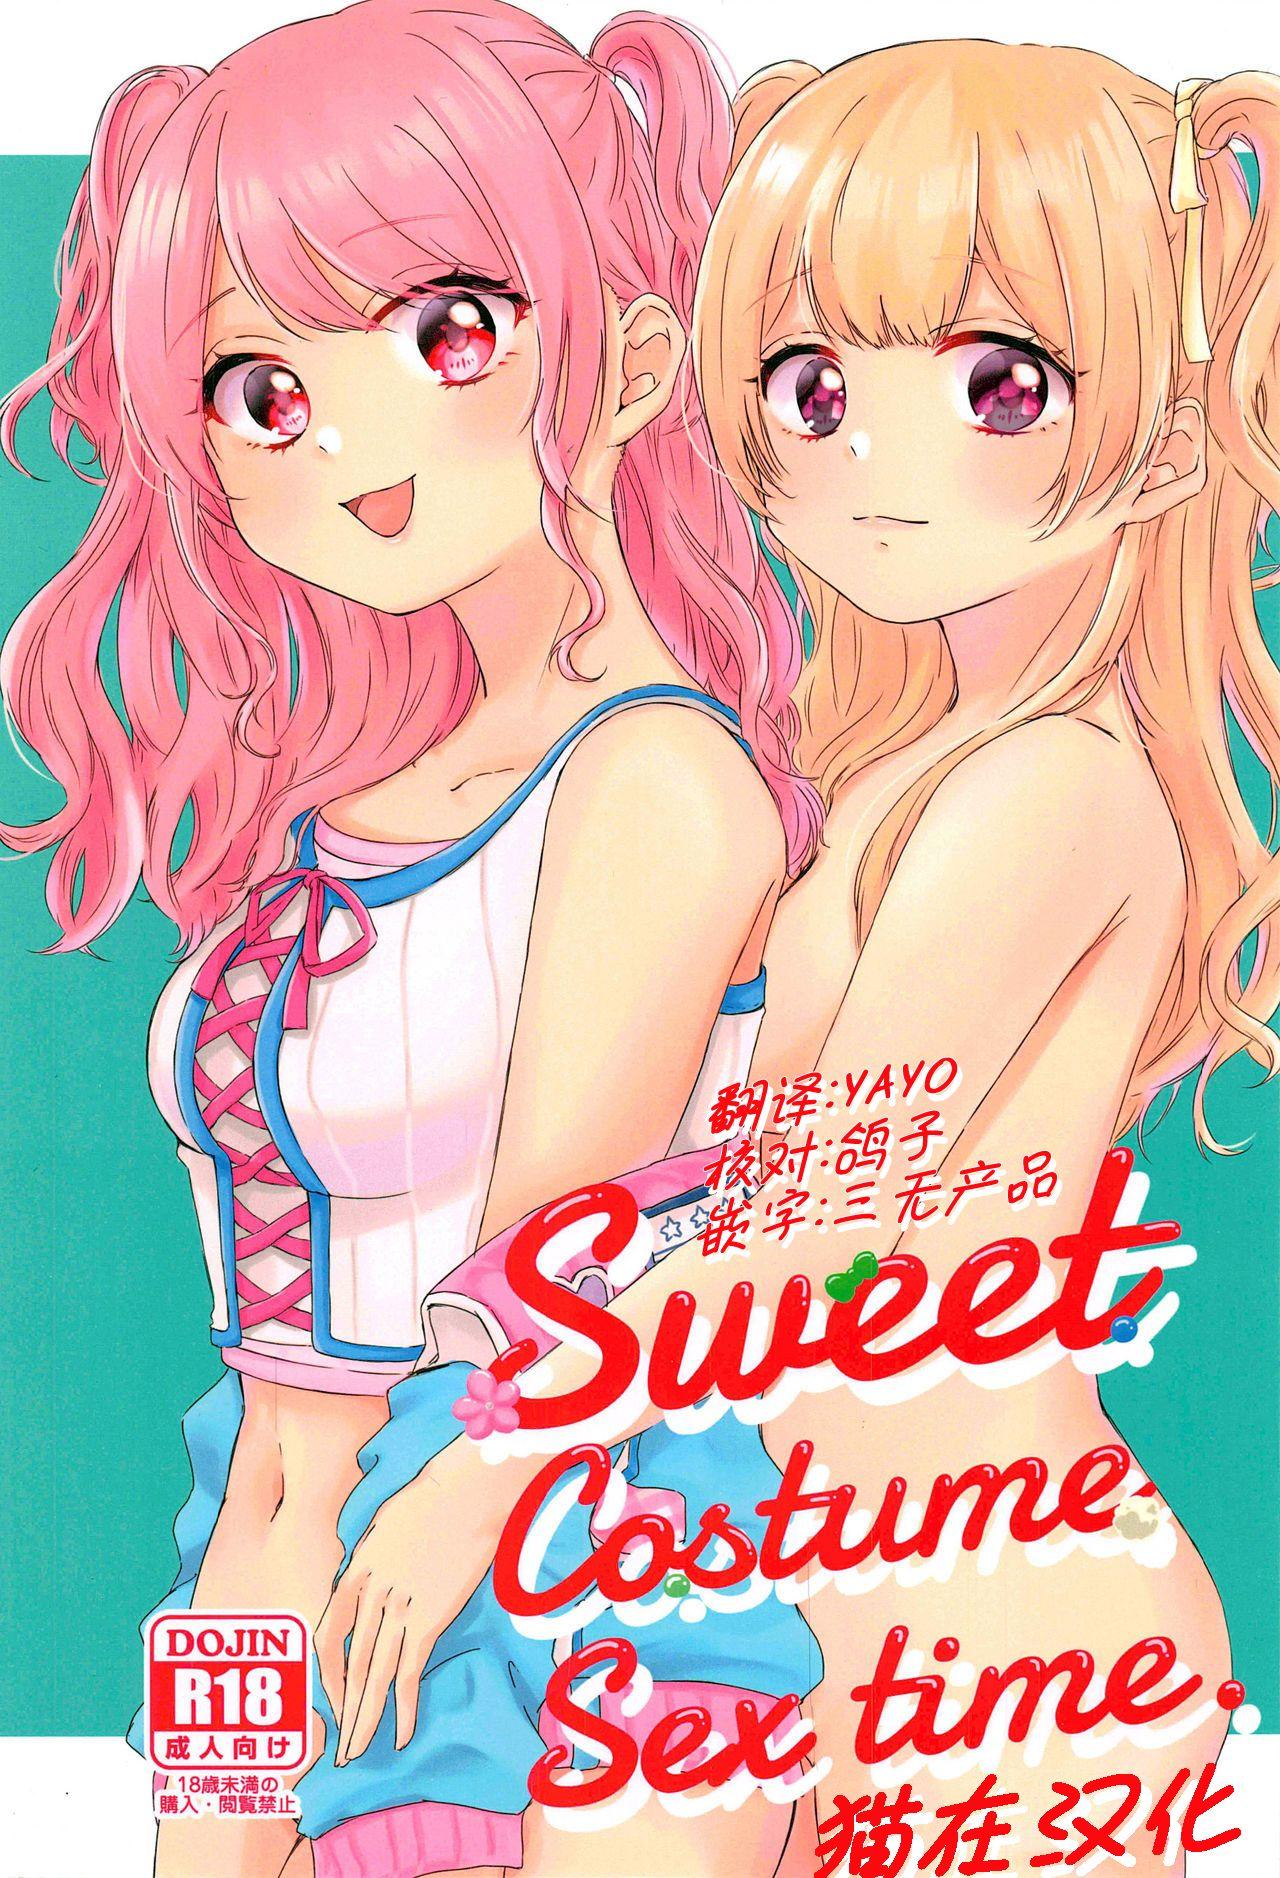 Web Cam Sweet Costume Sex time. - Bang dream Beurette - Picture 1